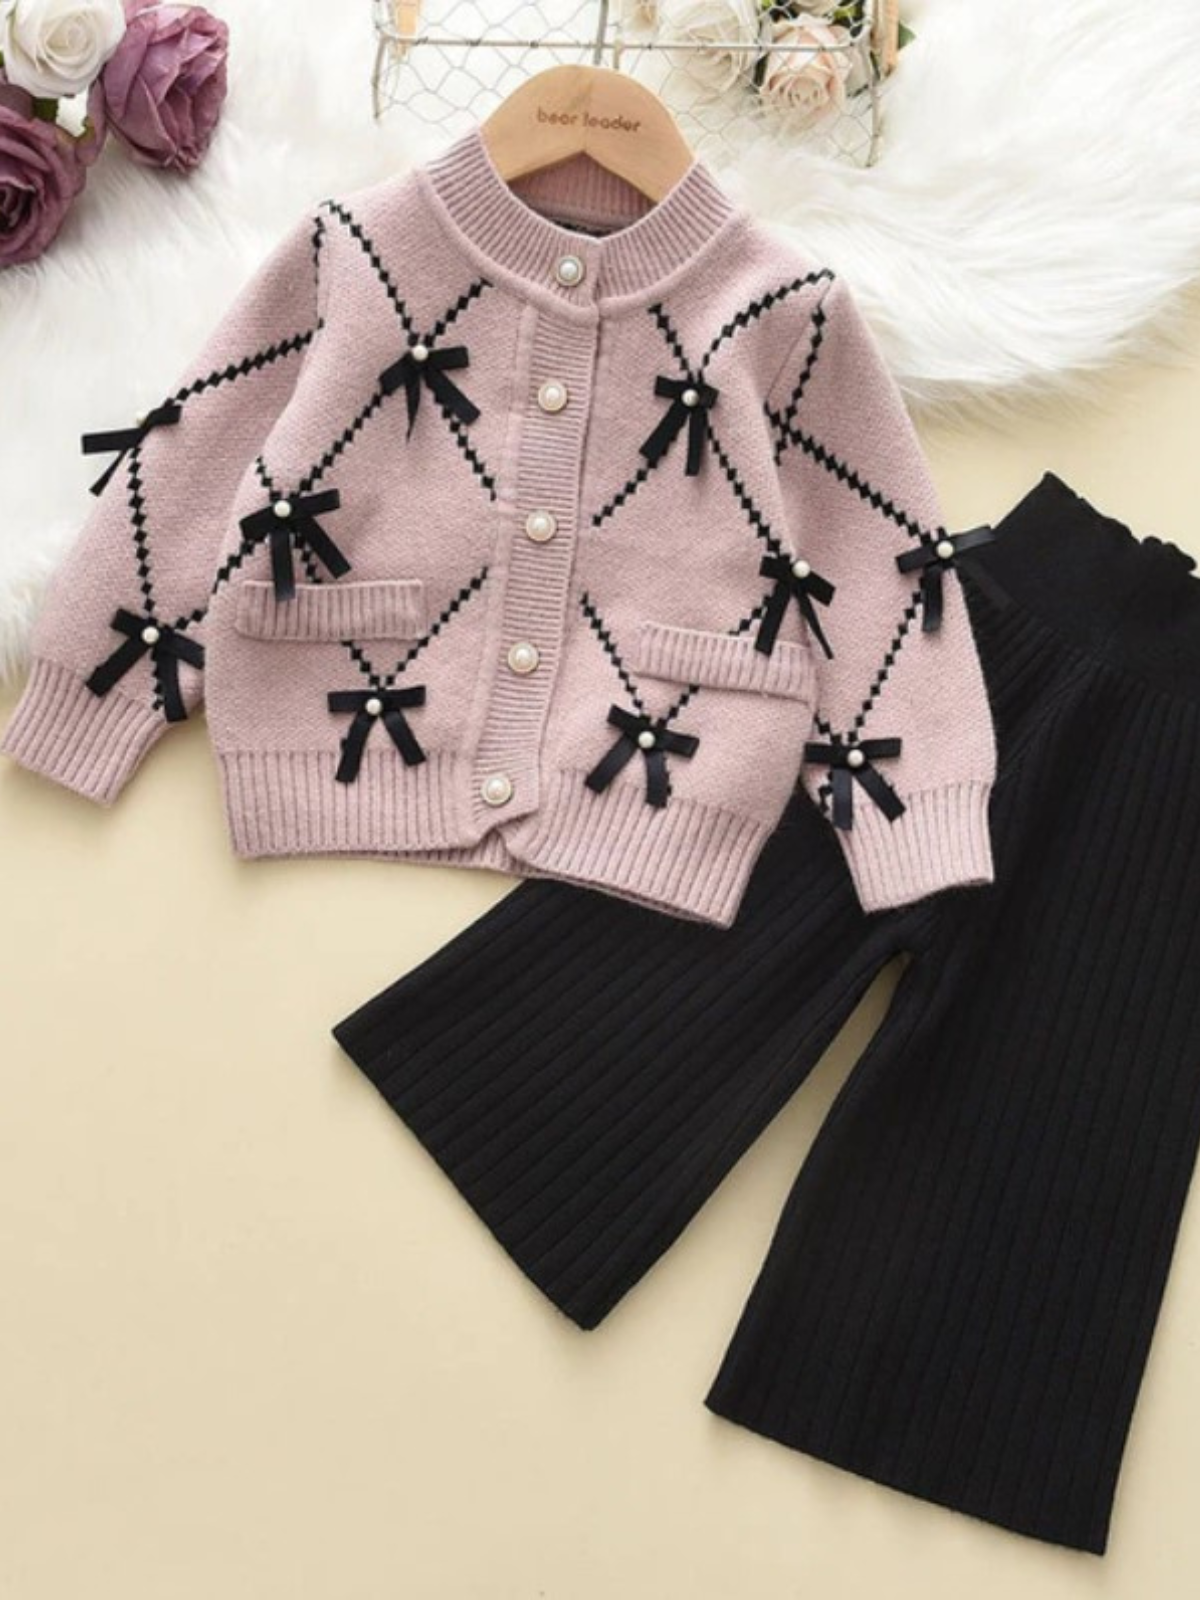 Perfectly Pink Tunic Sweater - Girl Meets Bow